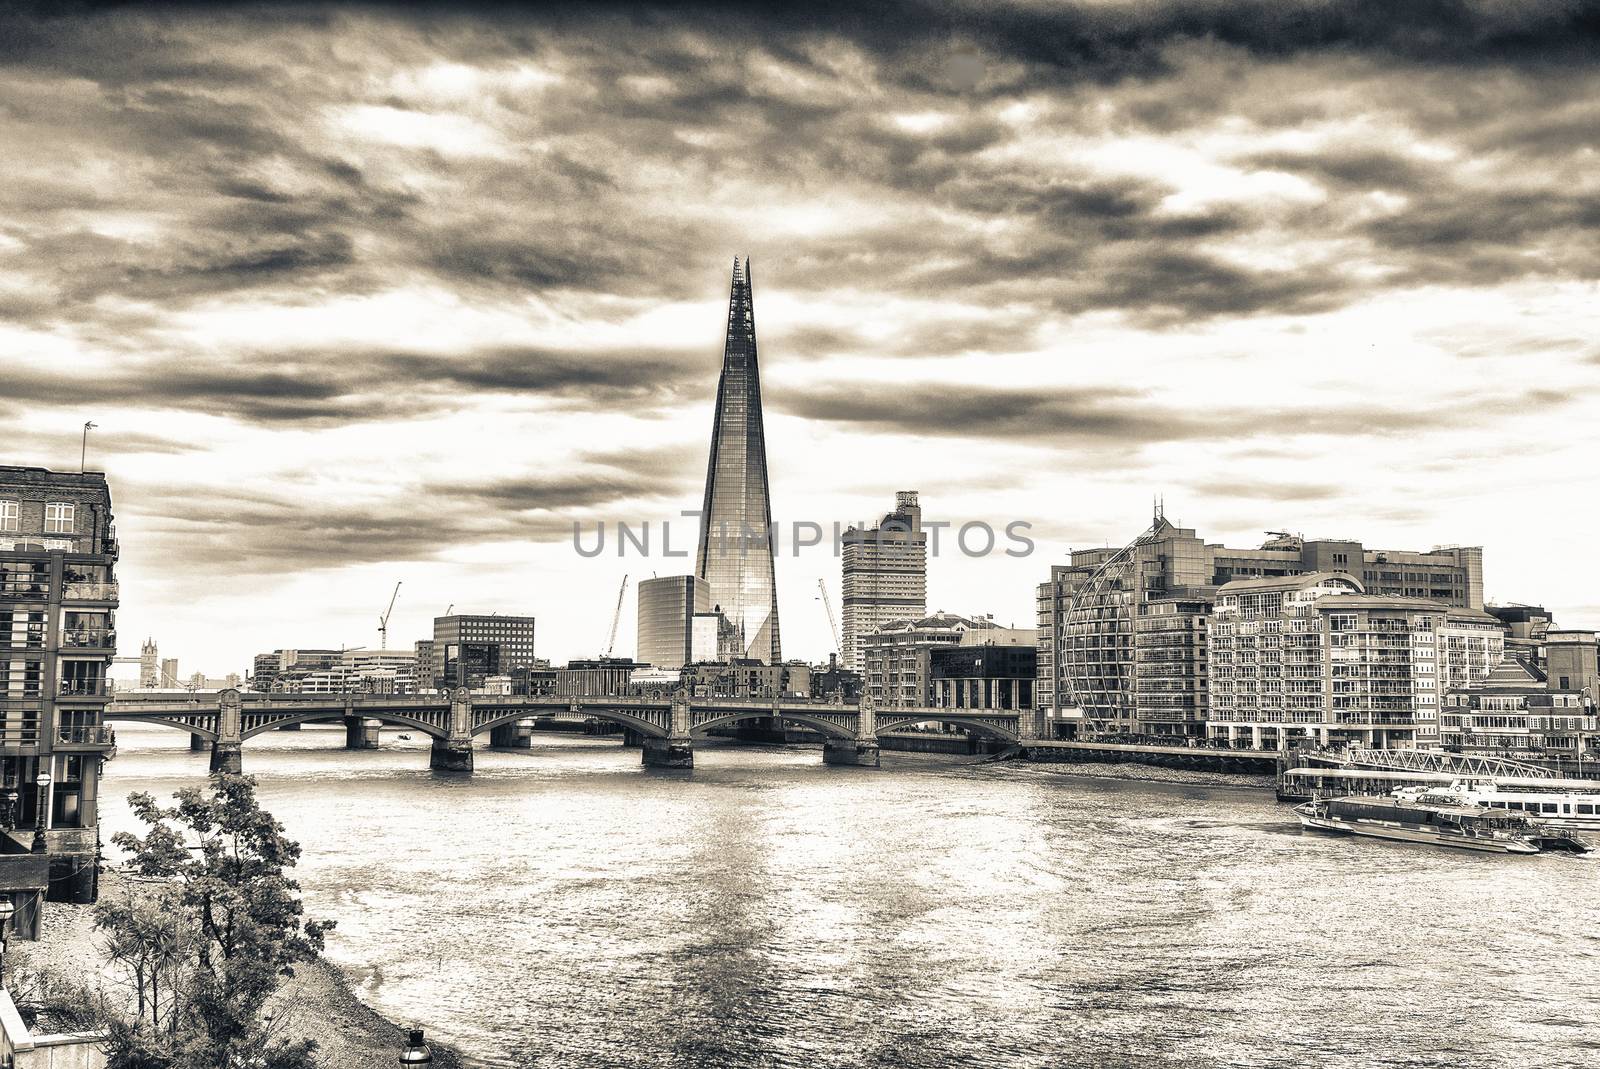 London skyline and Thames river on a cloudy day.